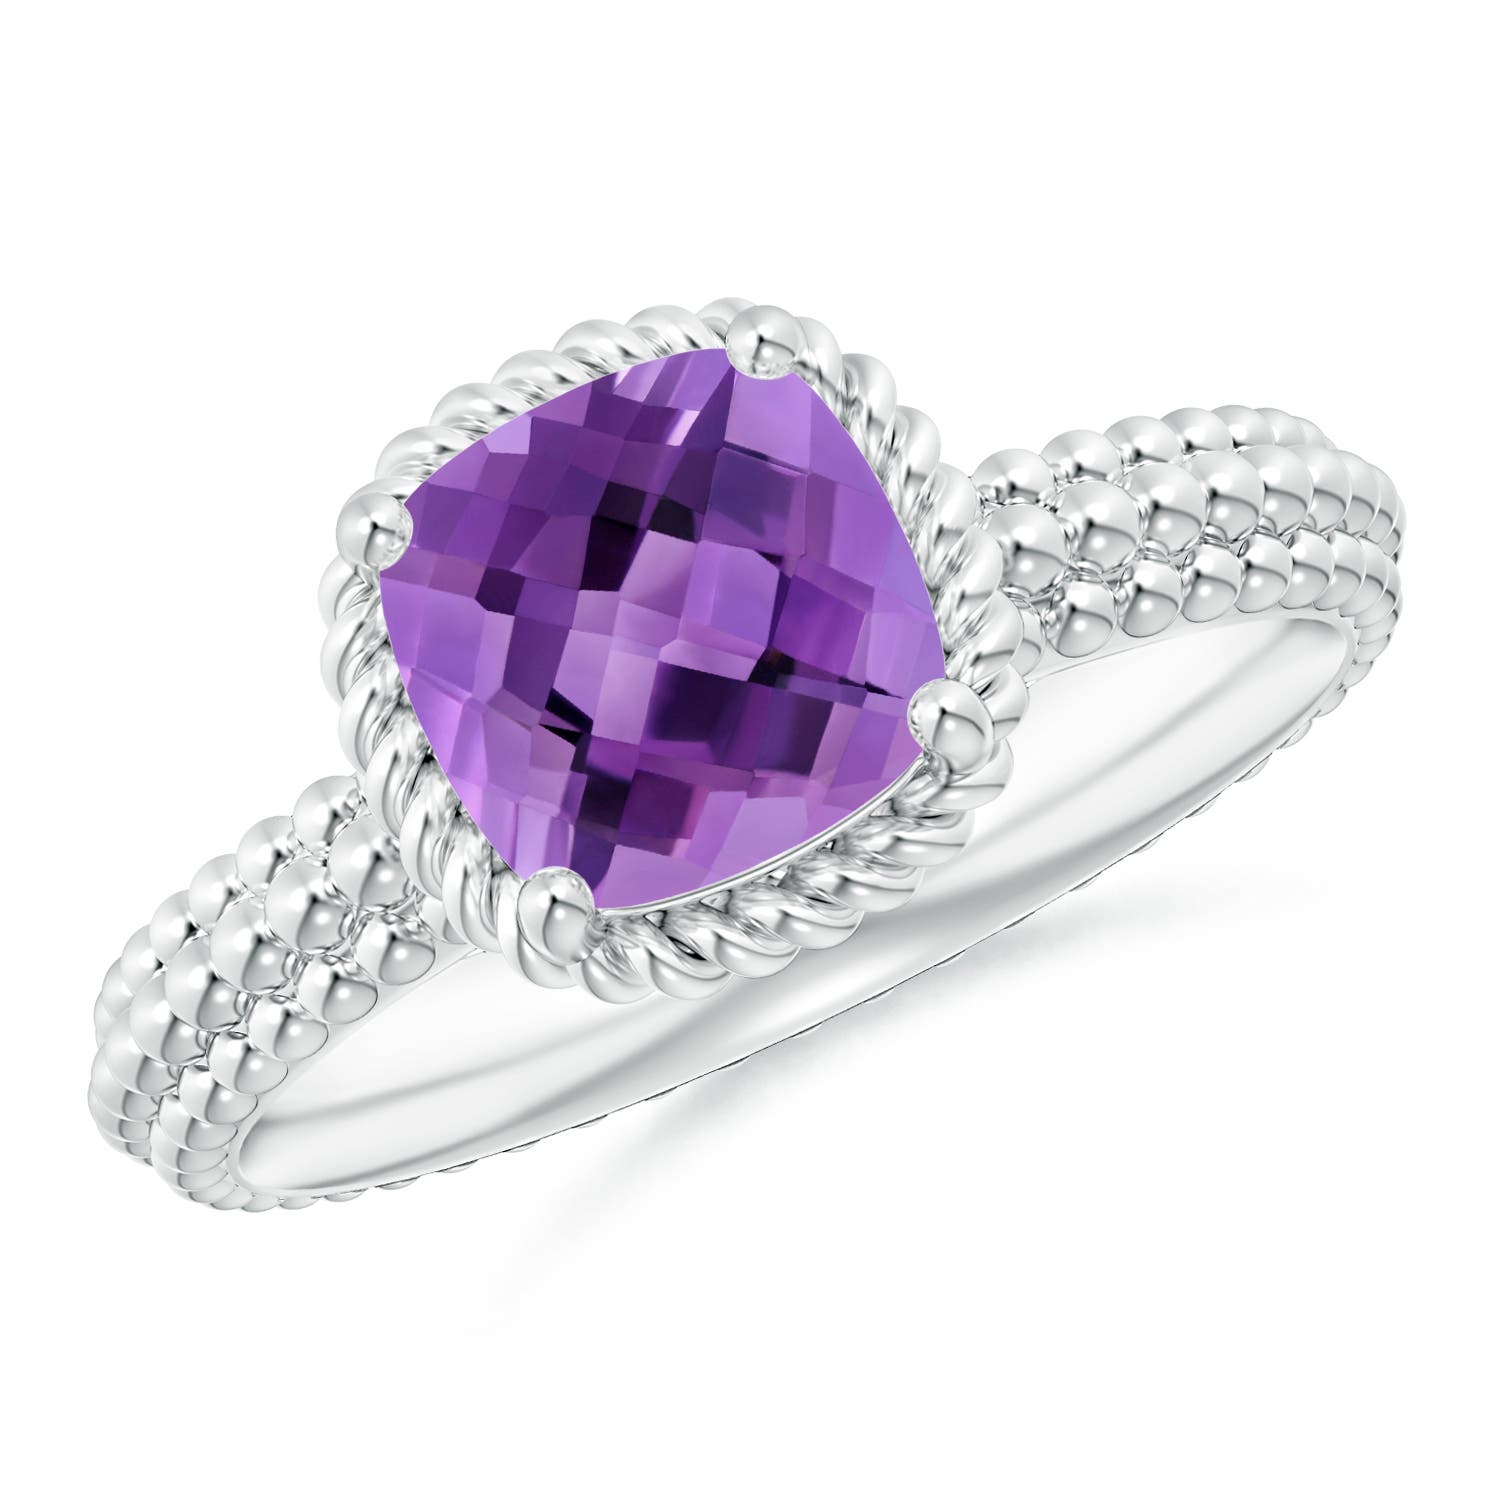 AA - Amethyst / 1.35 CT / 14 KT White Gold